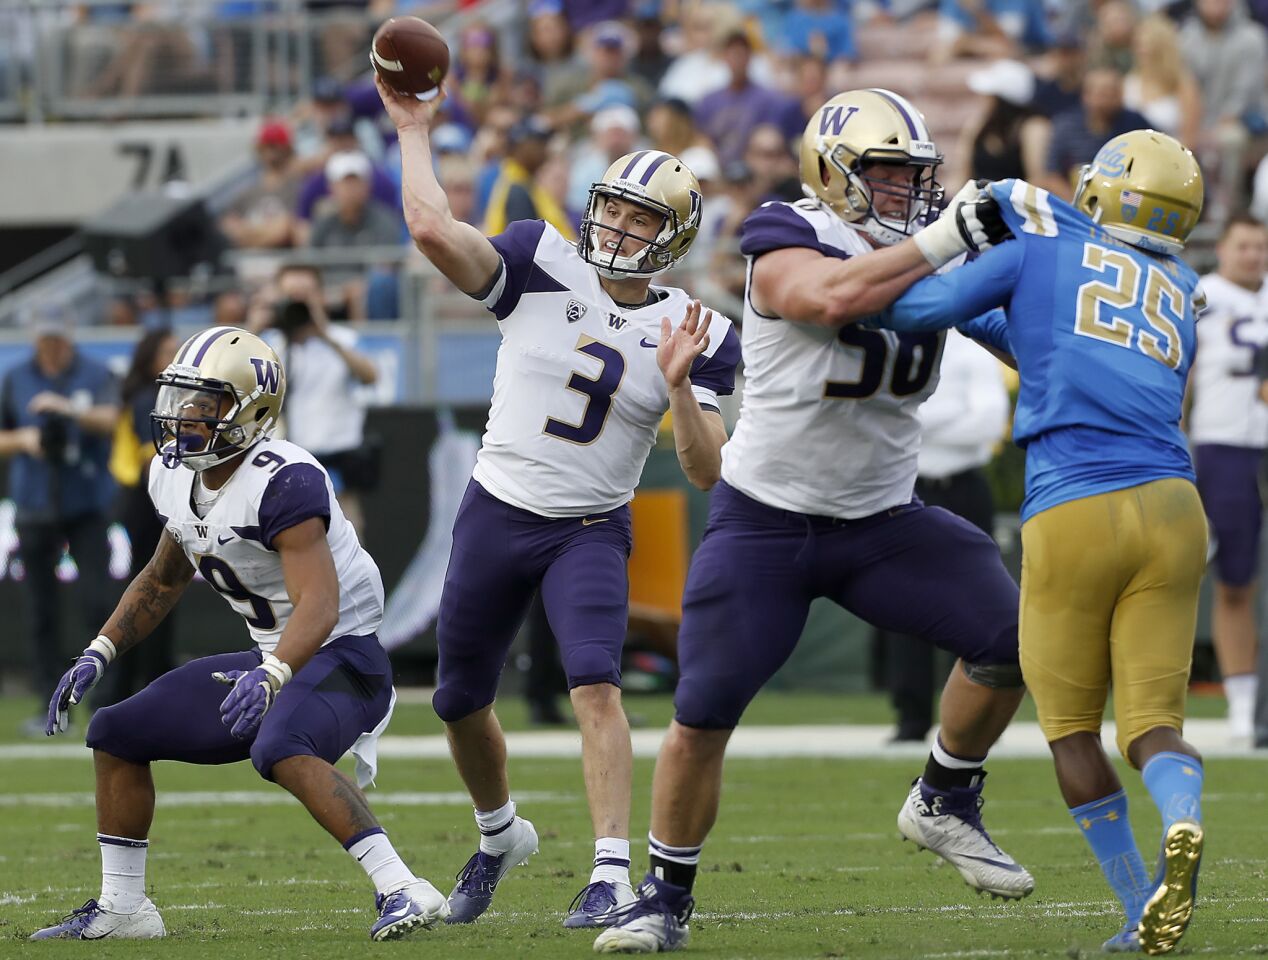 Washington quarterback Jake Browning throws downfield against UCLA in the first quarter on Saturday at the Rose Bowl.